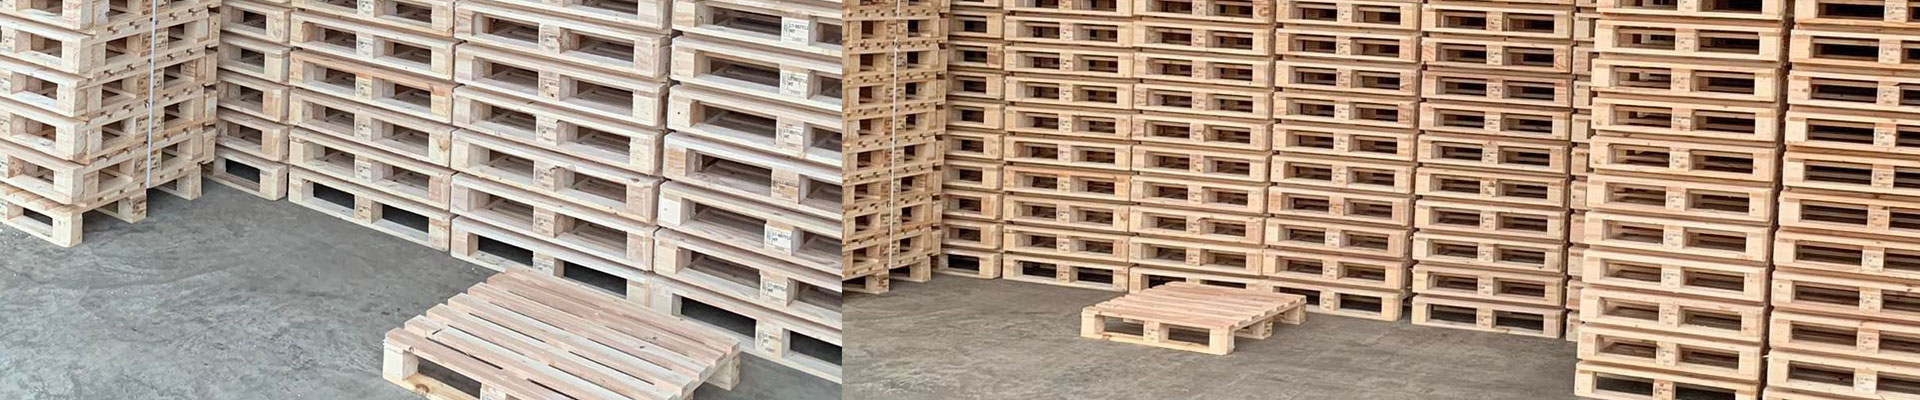 Non standard pallets in drying chamber